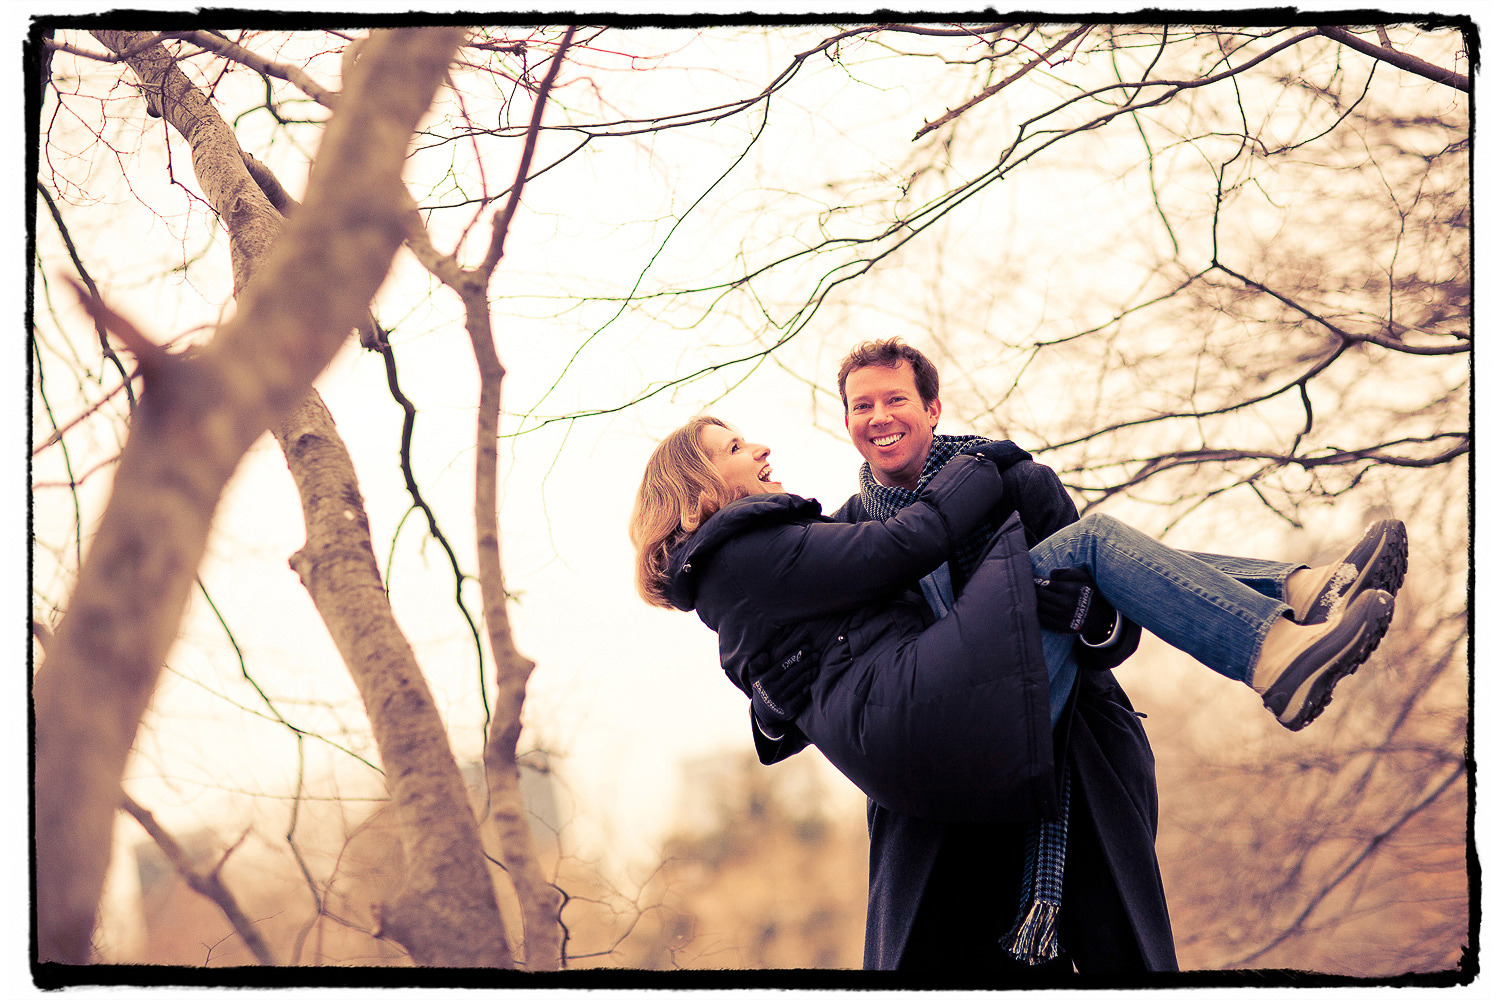 Engagement Portrait: Doug practices his threshold carrying in Central Park mid-winter.